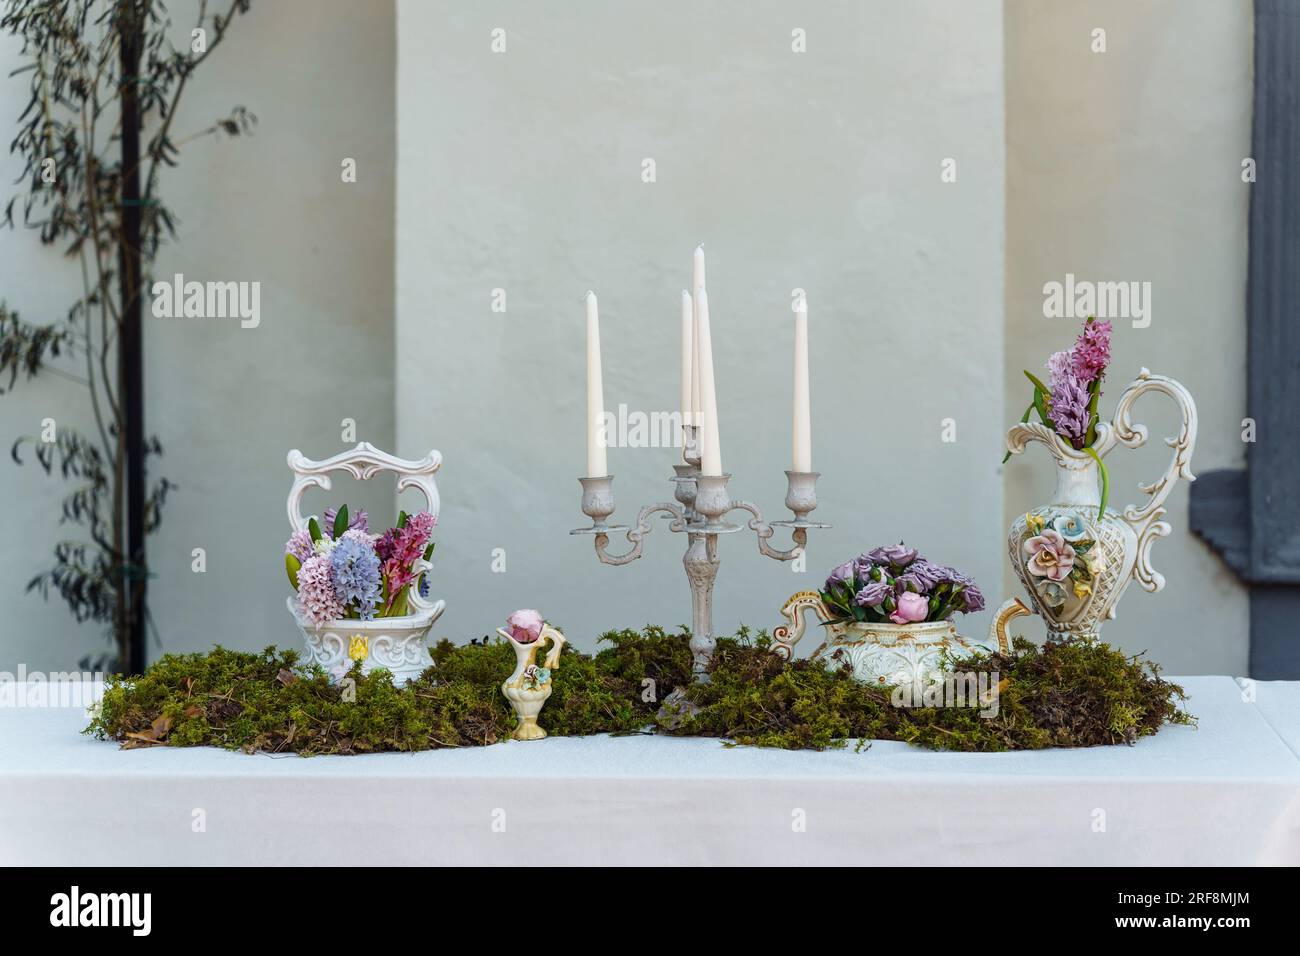 Decorative decoration of the festive table. Candlestick with candles, vases with hyacinths and other flowers, green moss on a table covered with a Stock Photo